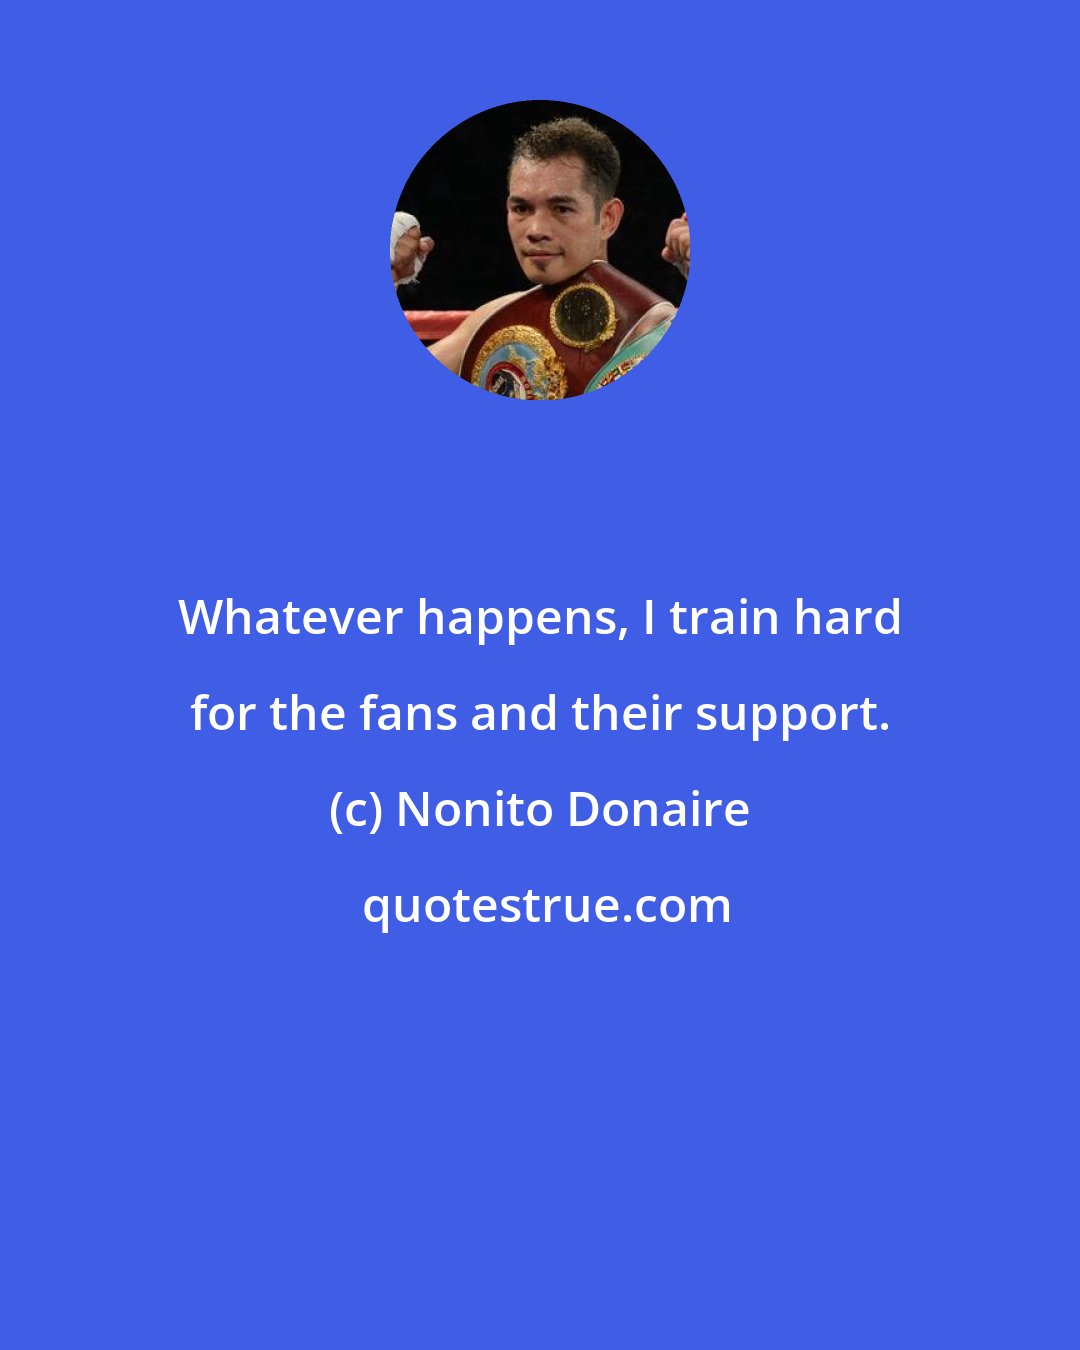 Nonito Donaire: Whatever happens, I train hard for the fans and their support.